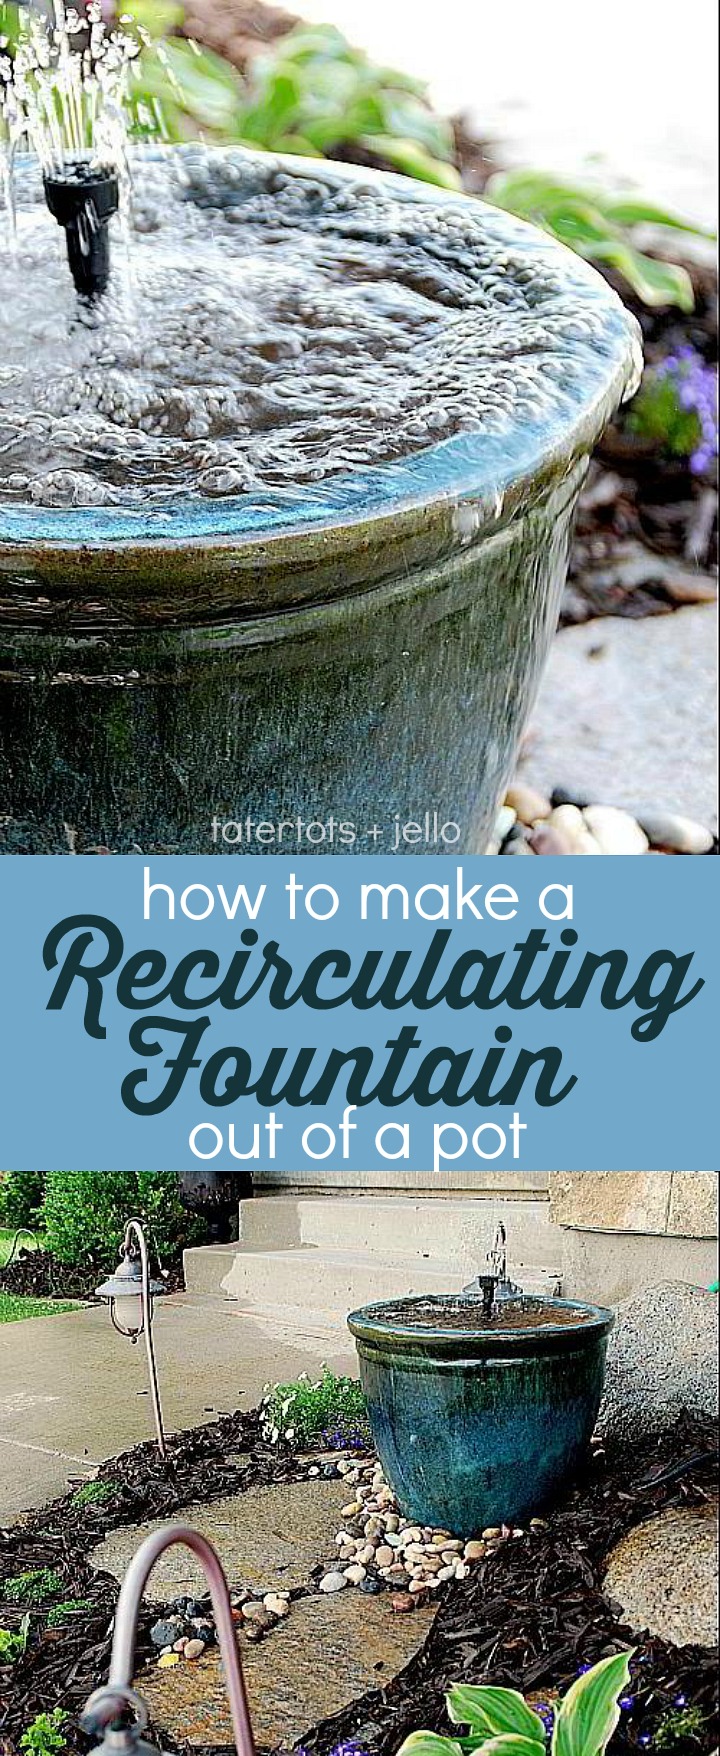 Create a soothing fountain for your yard with just a few simple items from the hardware store. Make a soothing recirculating fountain for your home this summer!  